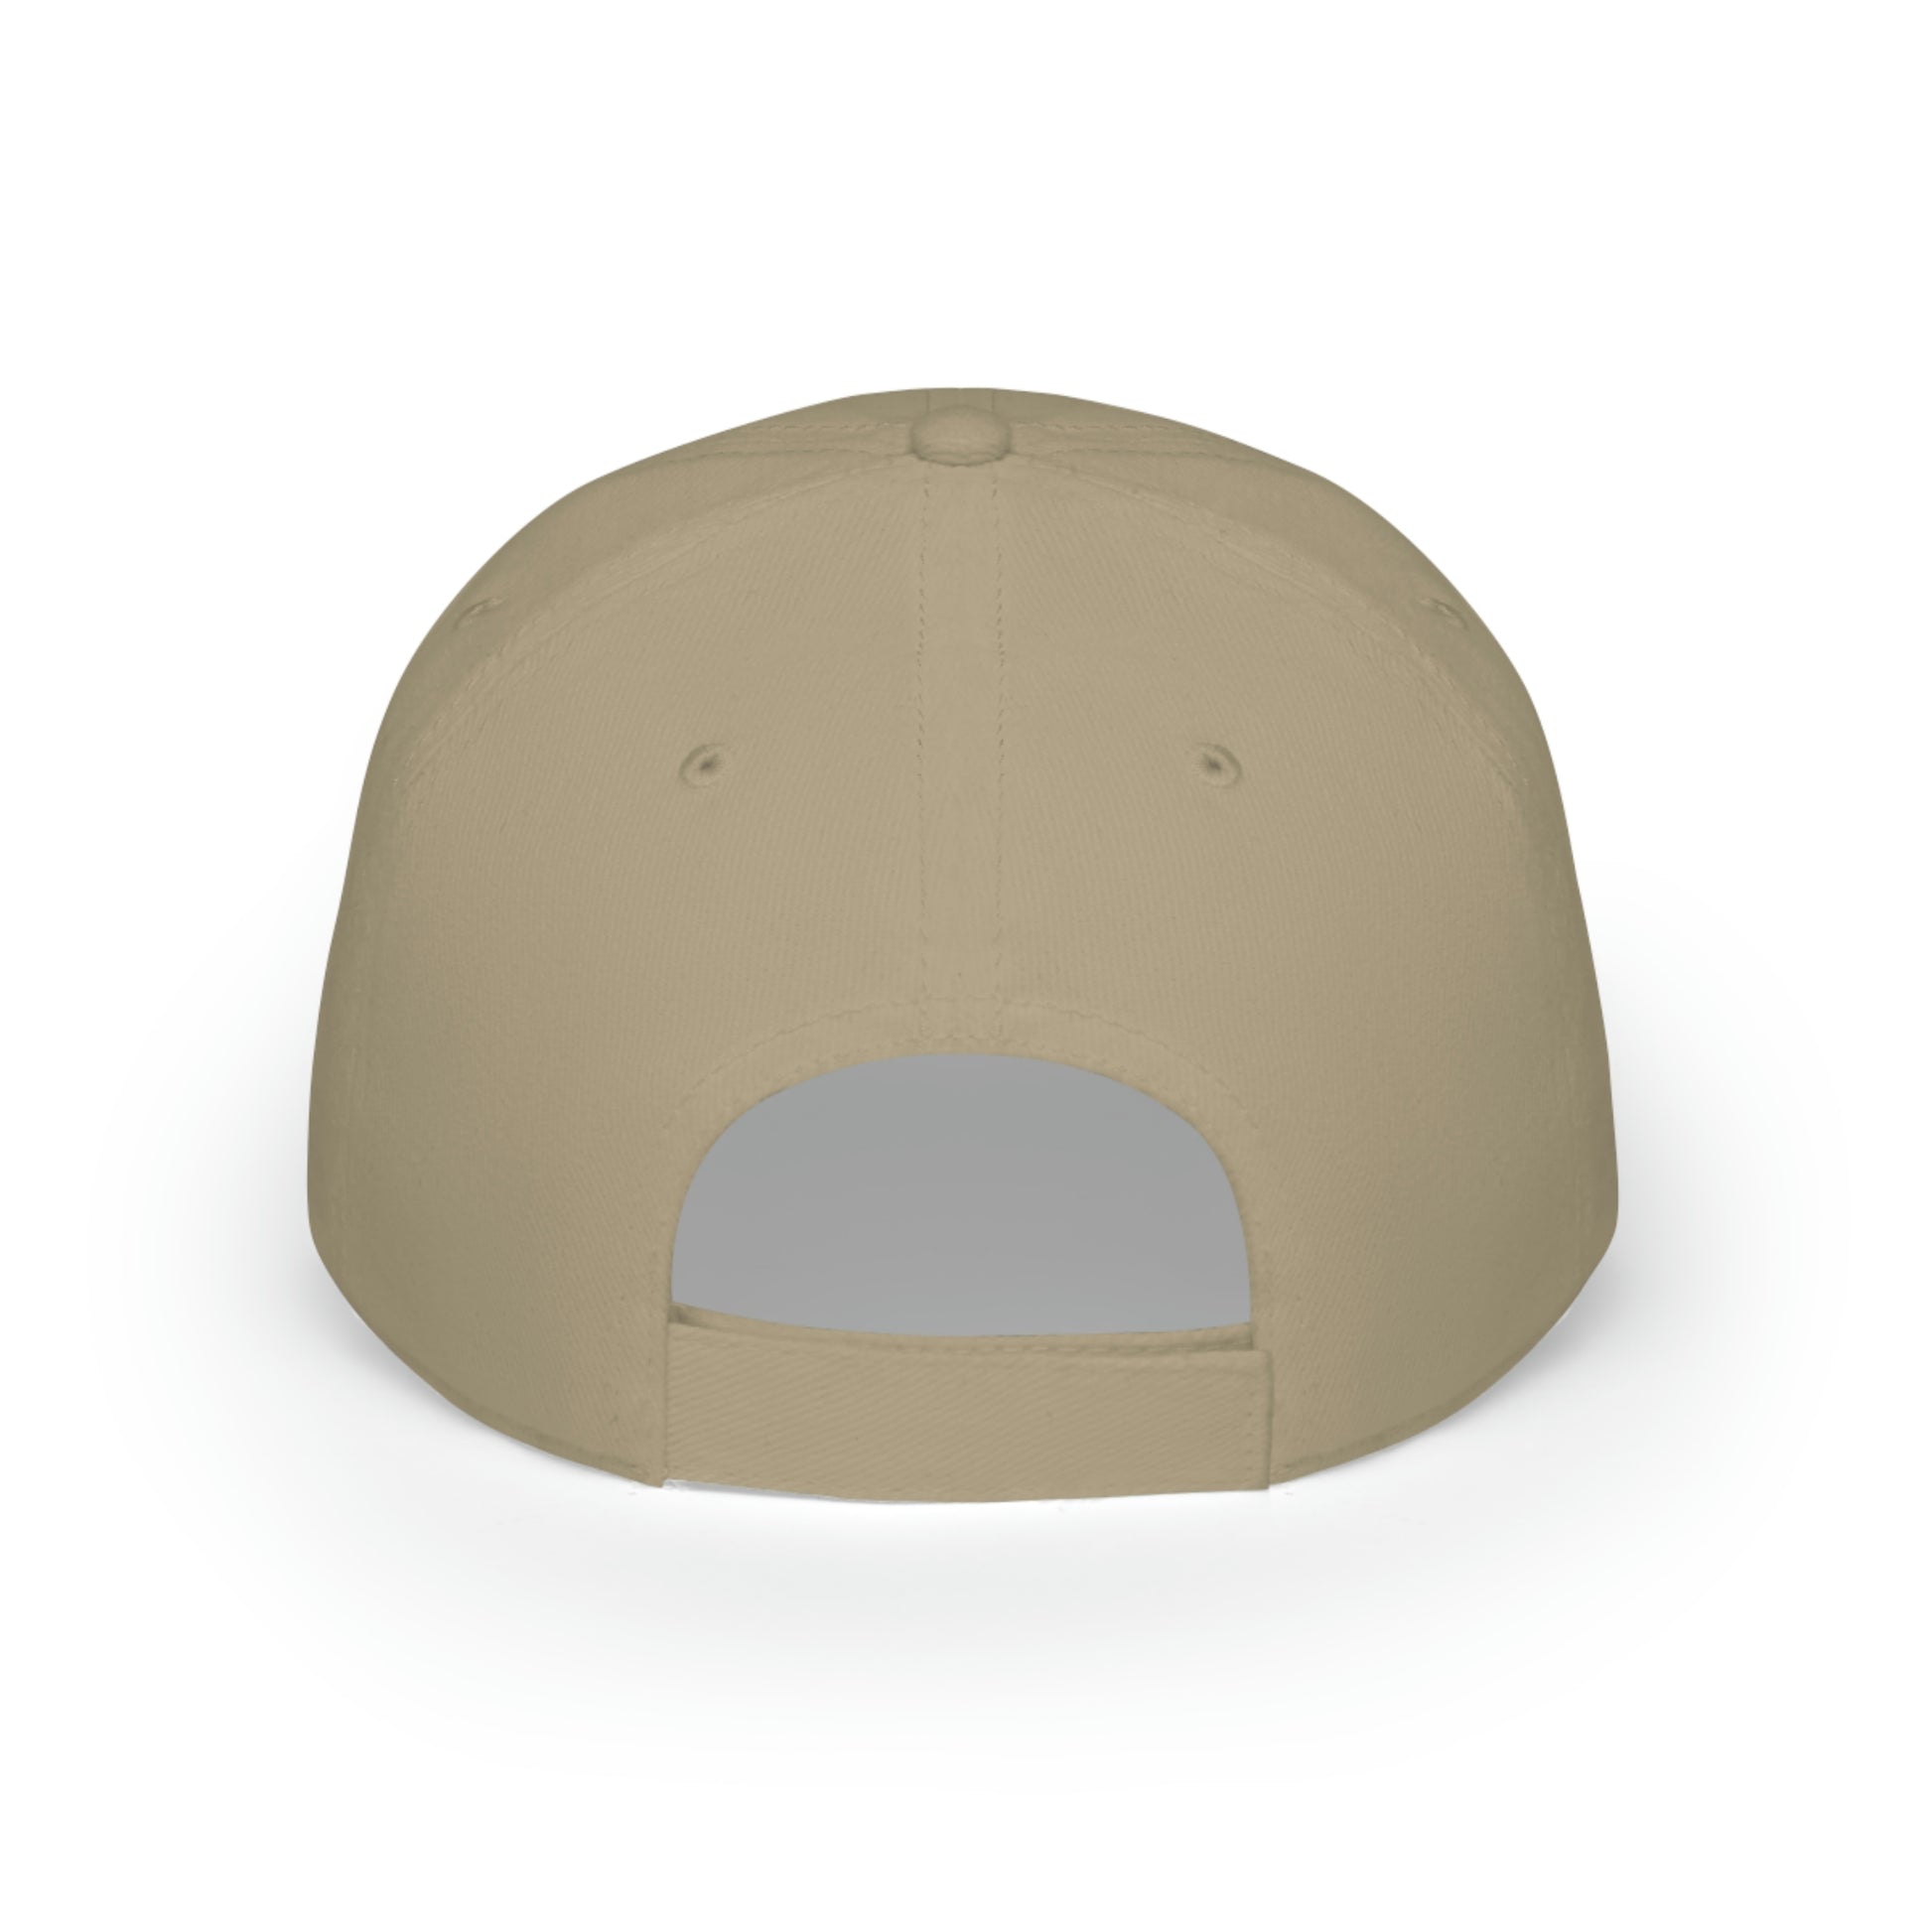 Thrashed Off-Road Abstract Tundra Hat - Mid-Atlantic Off-Roading